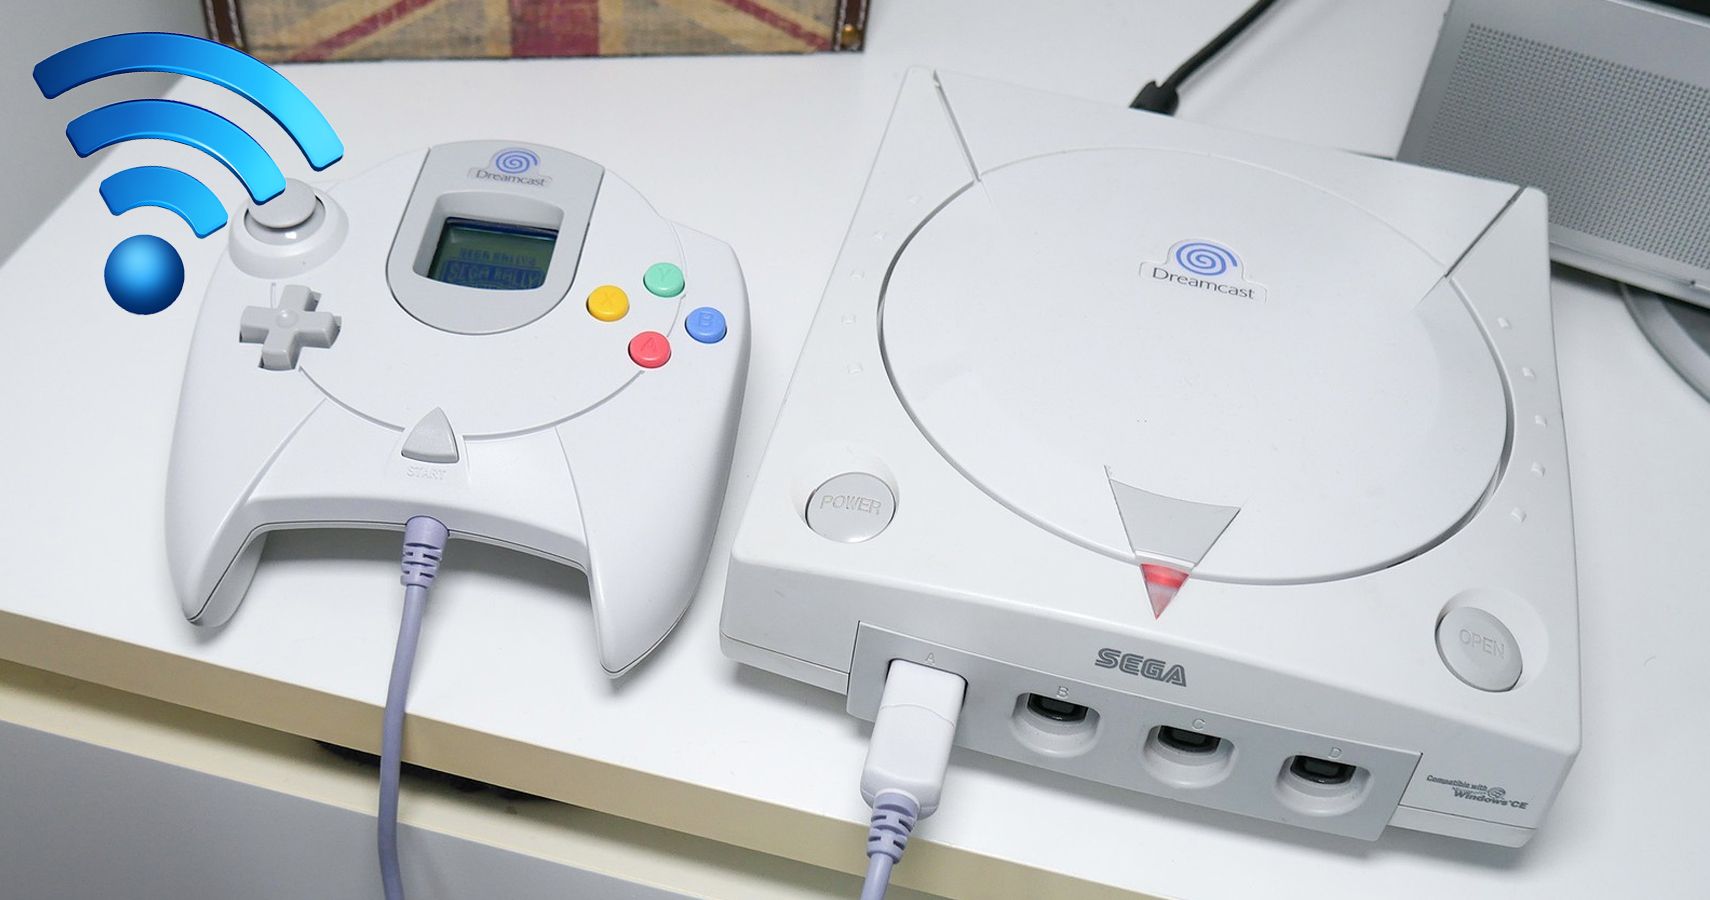 21 years ago, the Dreamcast failed – but it could (and should